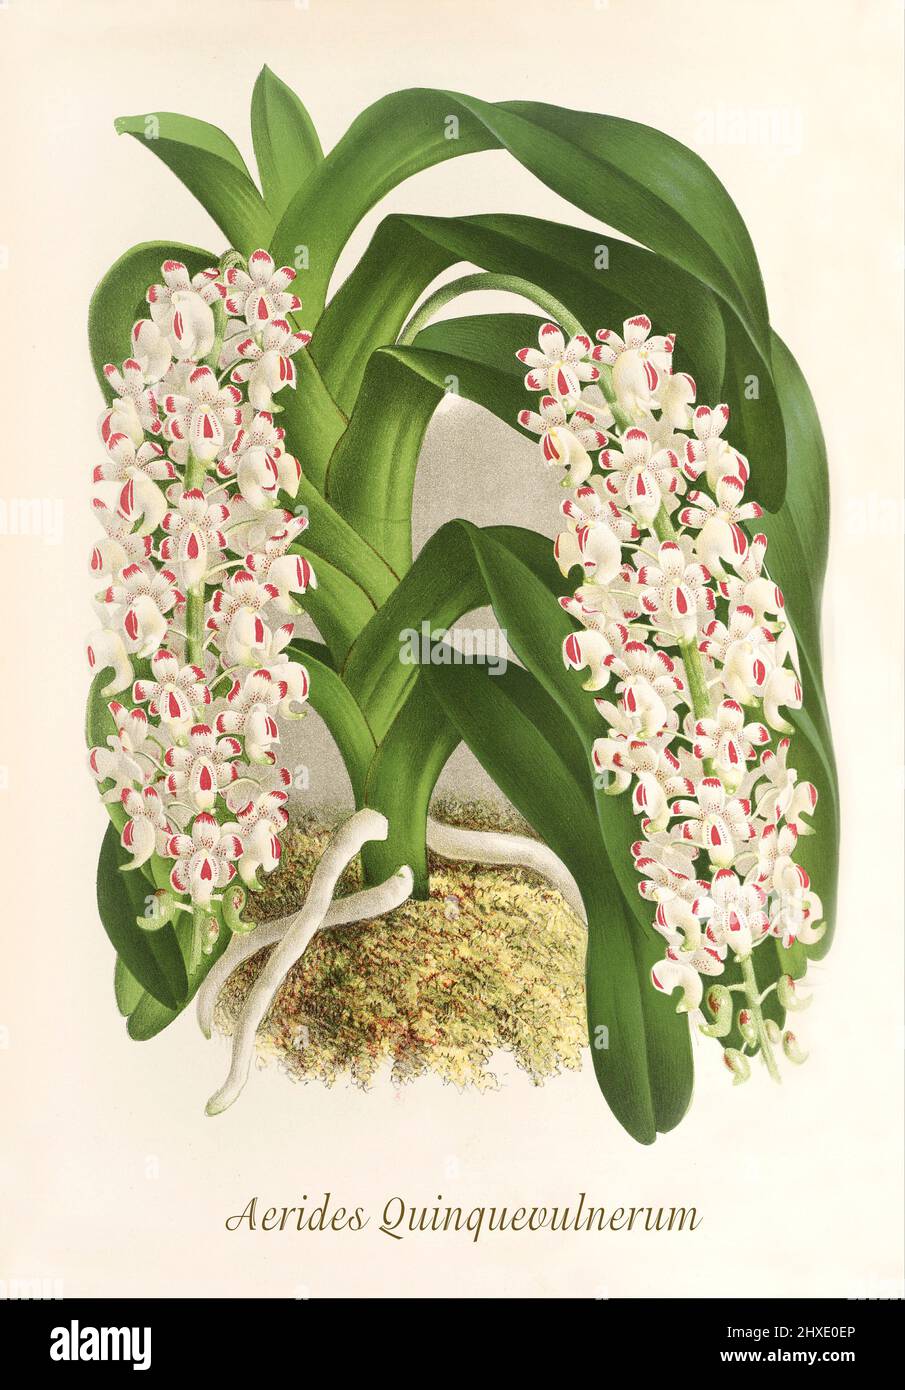 Aerides quinquevulnera is a species of orchid found in the Philippines and in New Guinea. From Iconographie des Orchidees, a magazine of botanical illustrations published by Jean Jules Linden (1817-1898) was a Belgian botanist, explorer and horticulturist who specialised in orchids. Stock Photo